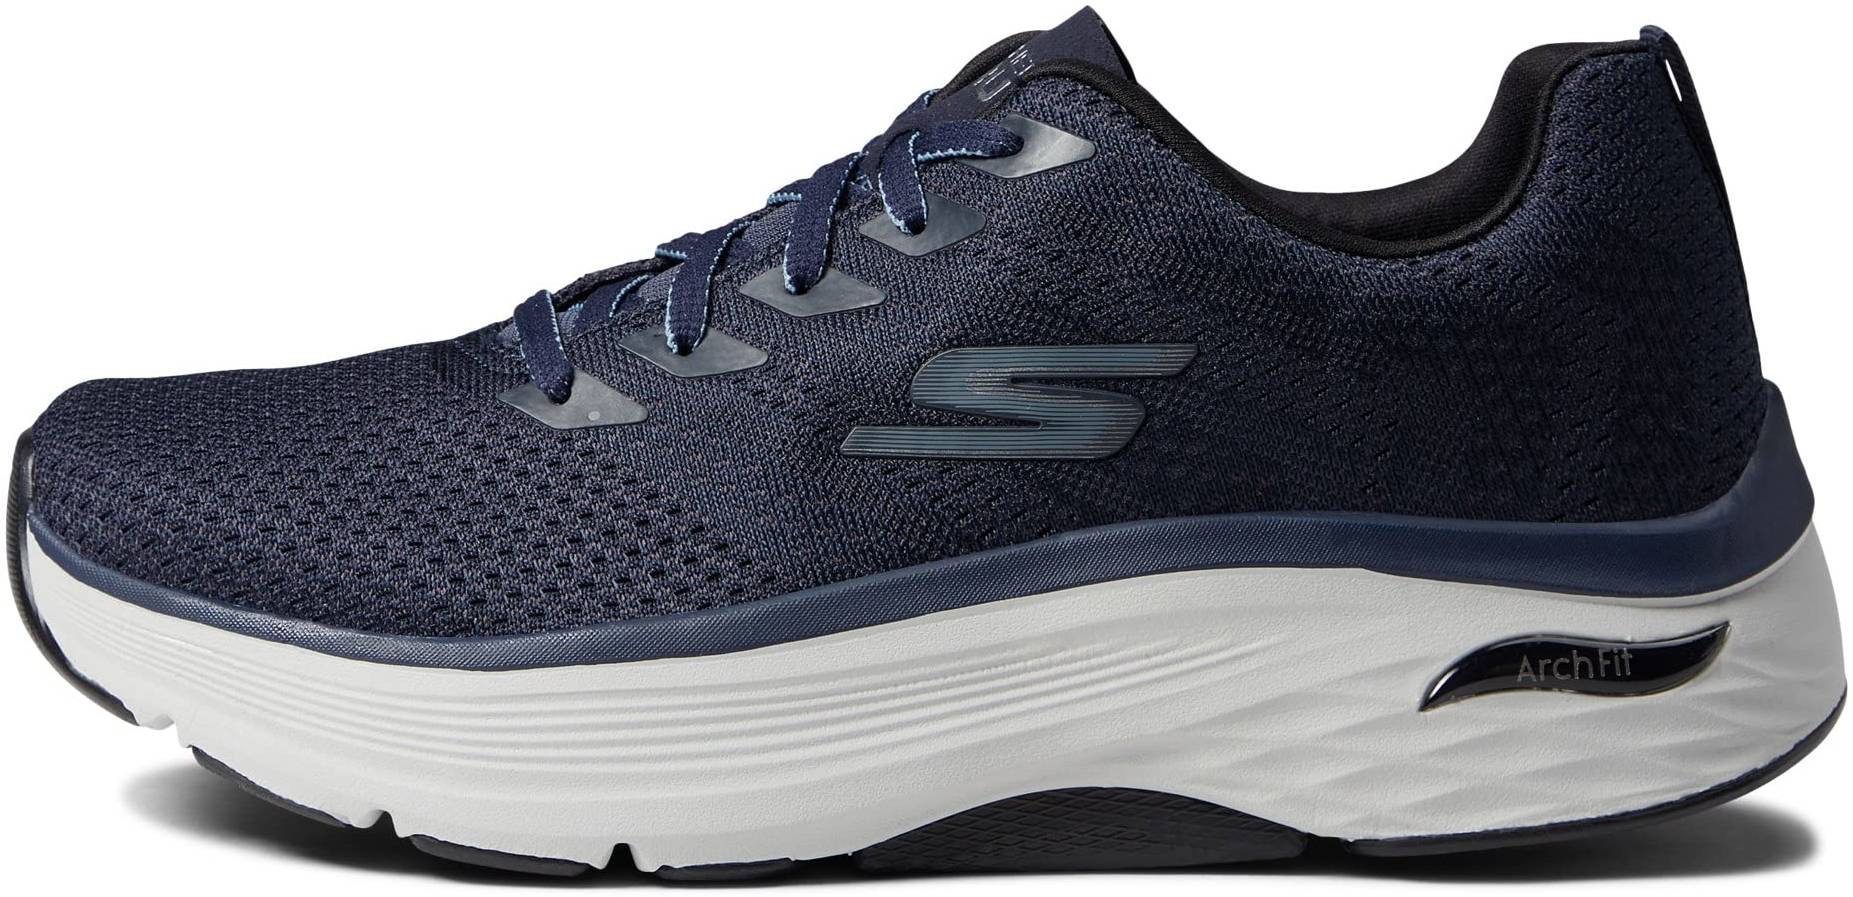 Skechers GO RUN Arch Fit Running Shoe Men's Free Shipping DSW | lupon ...